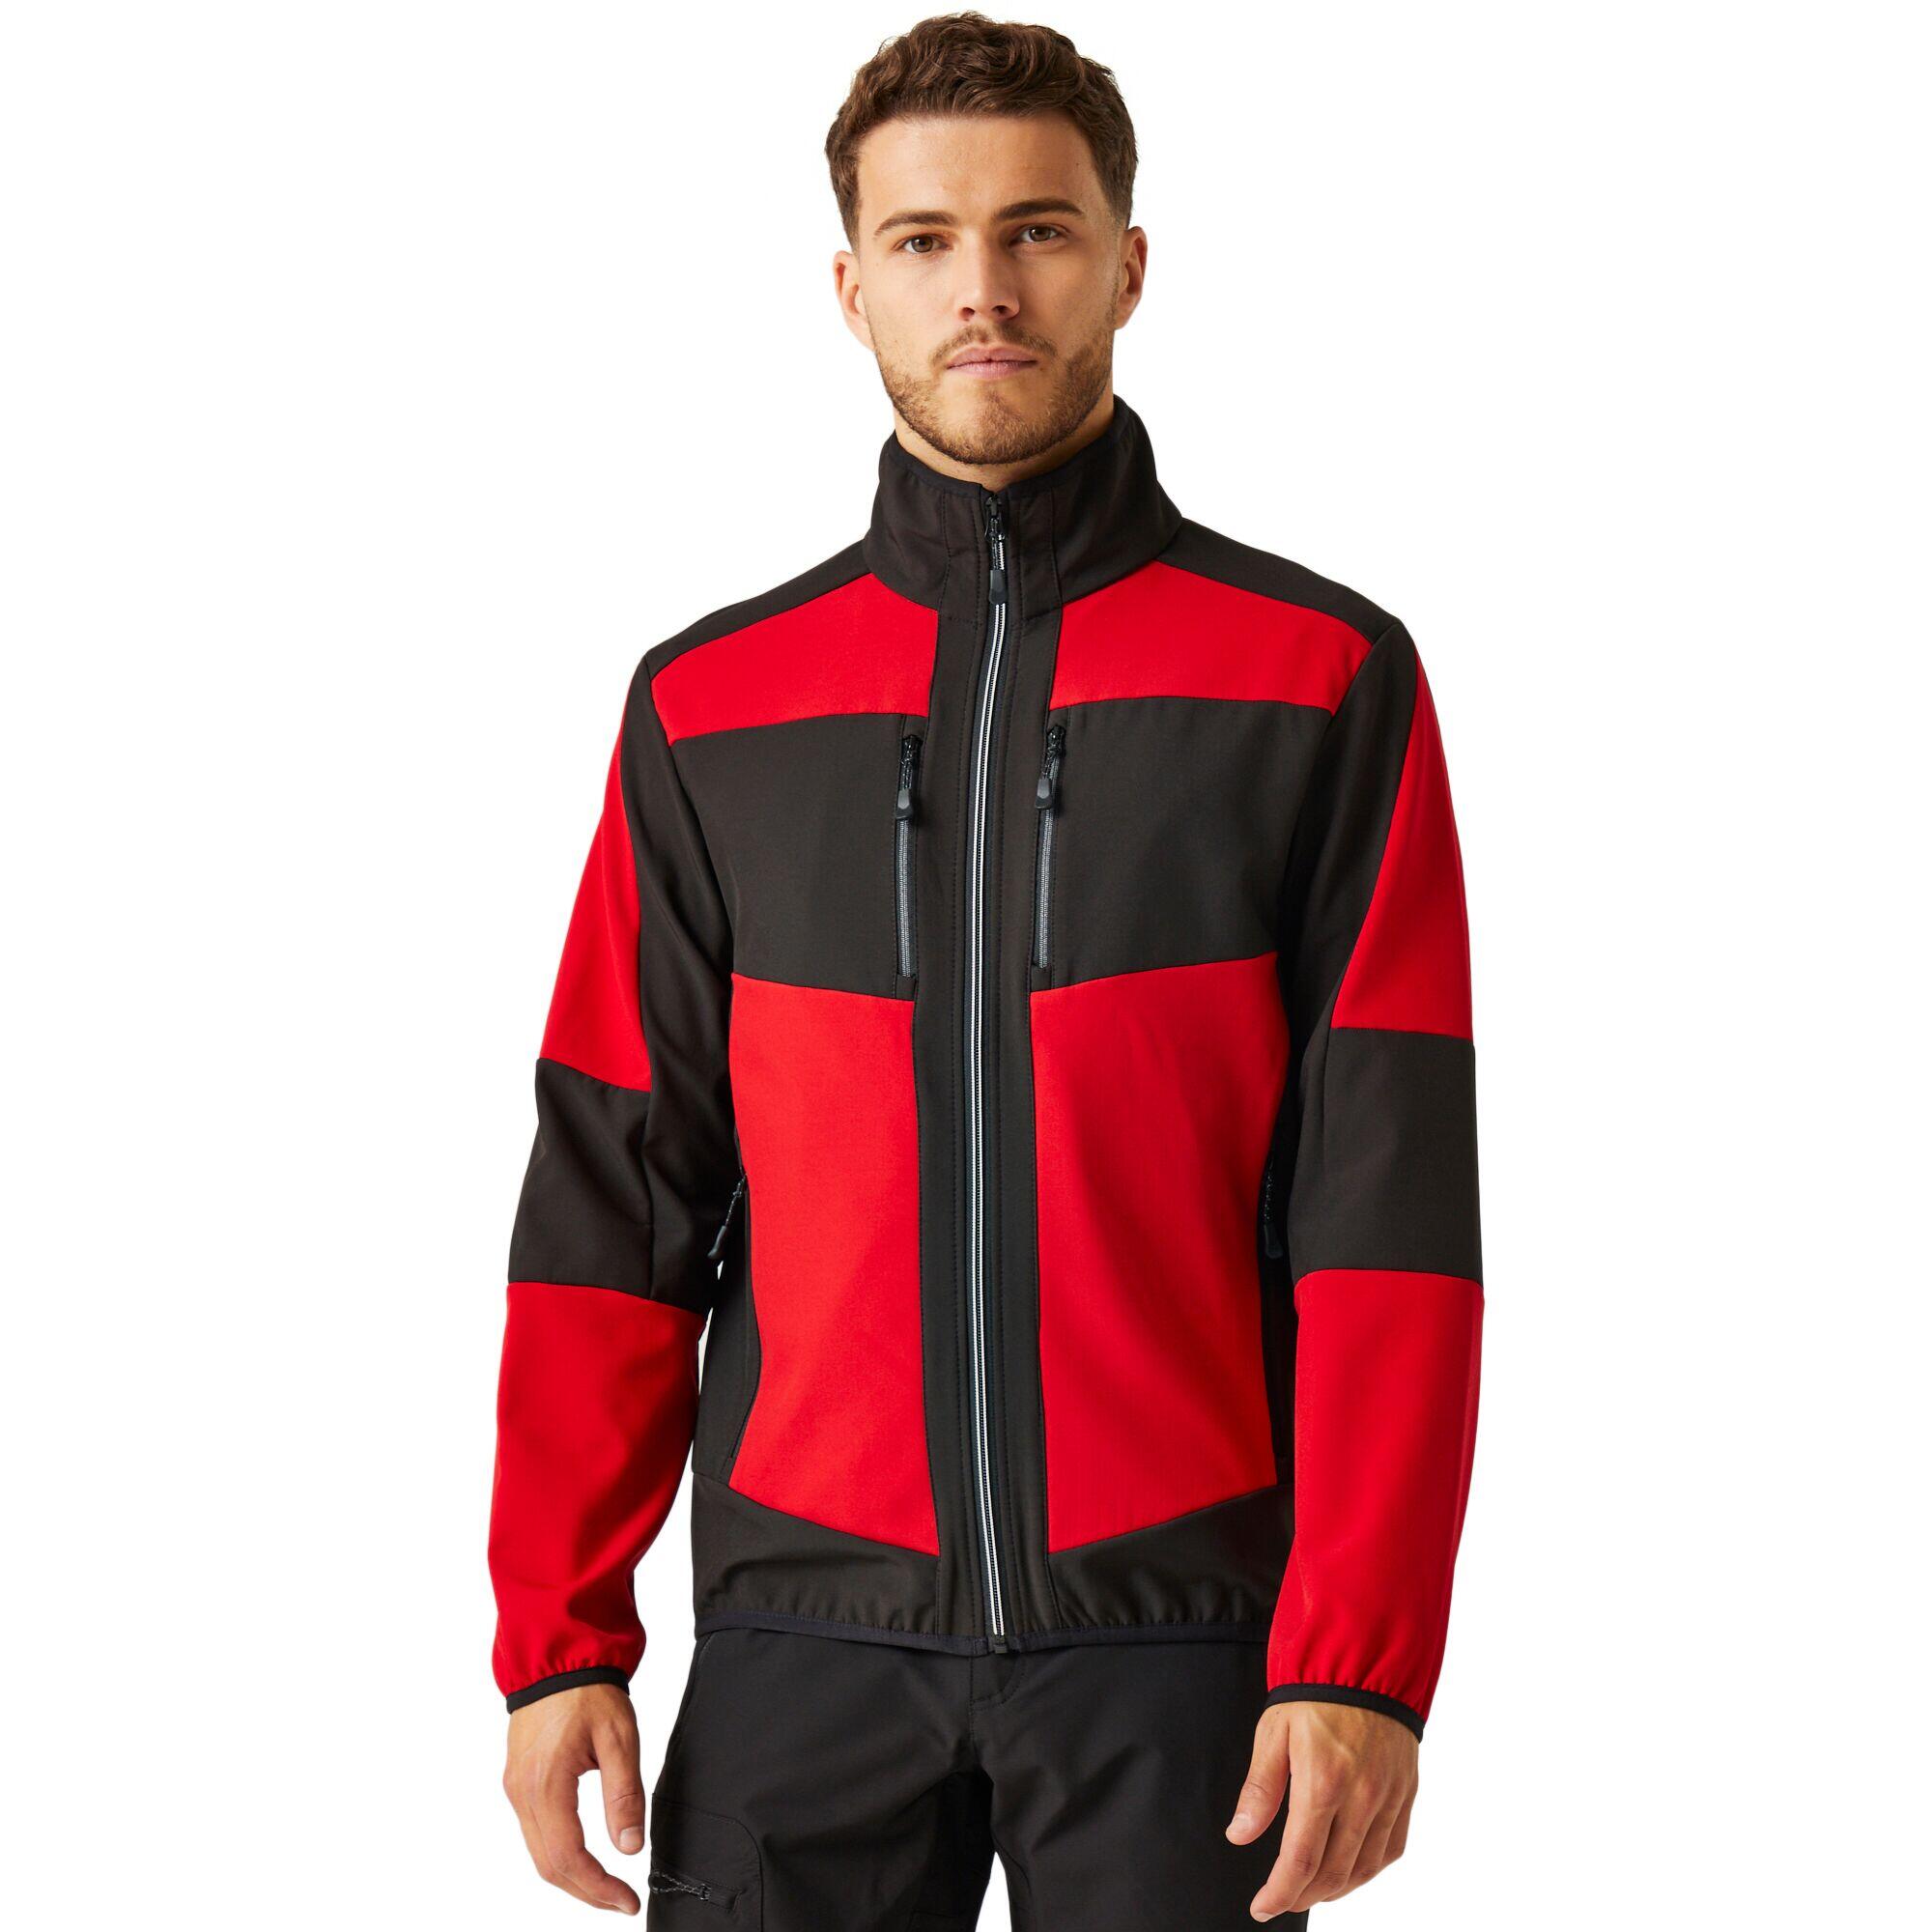 Unisex Adult EVolve 2 Layer Soft Shell Jacket (Classic Red/Black) 3/4